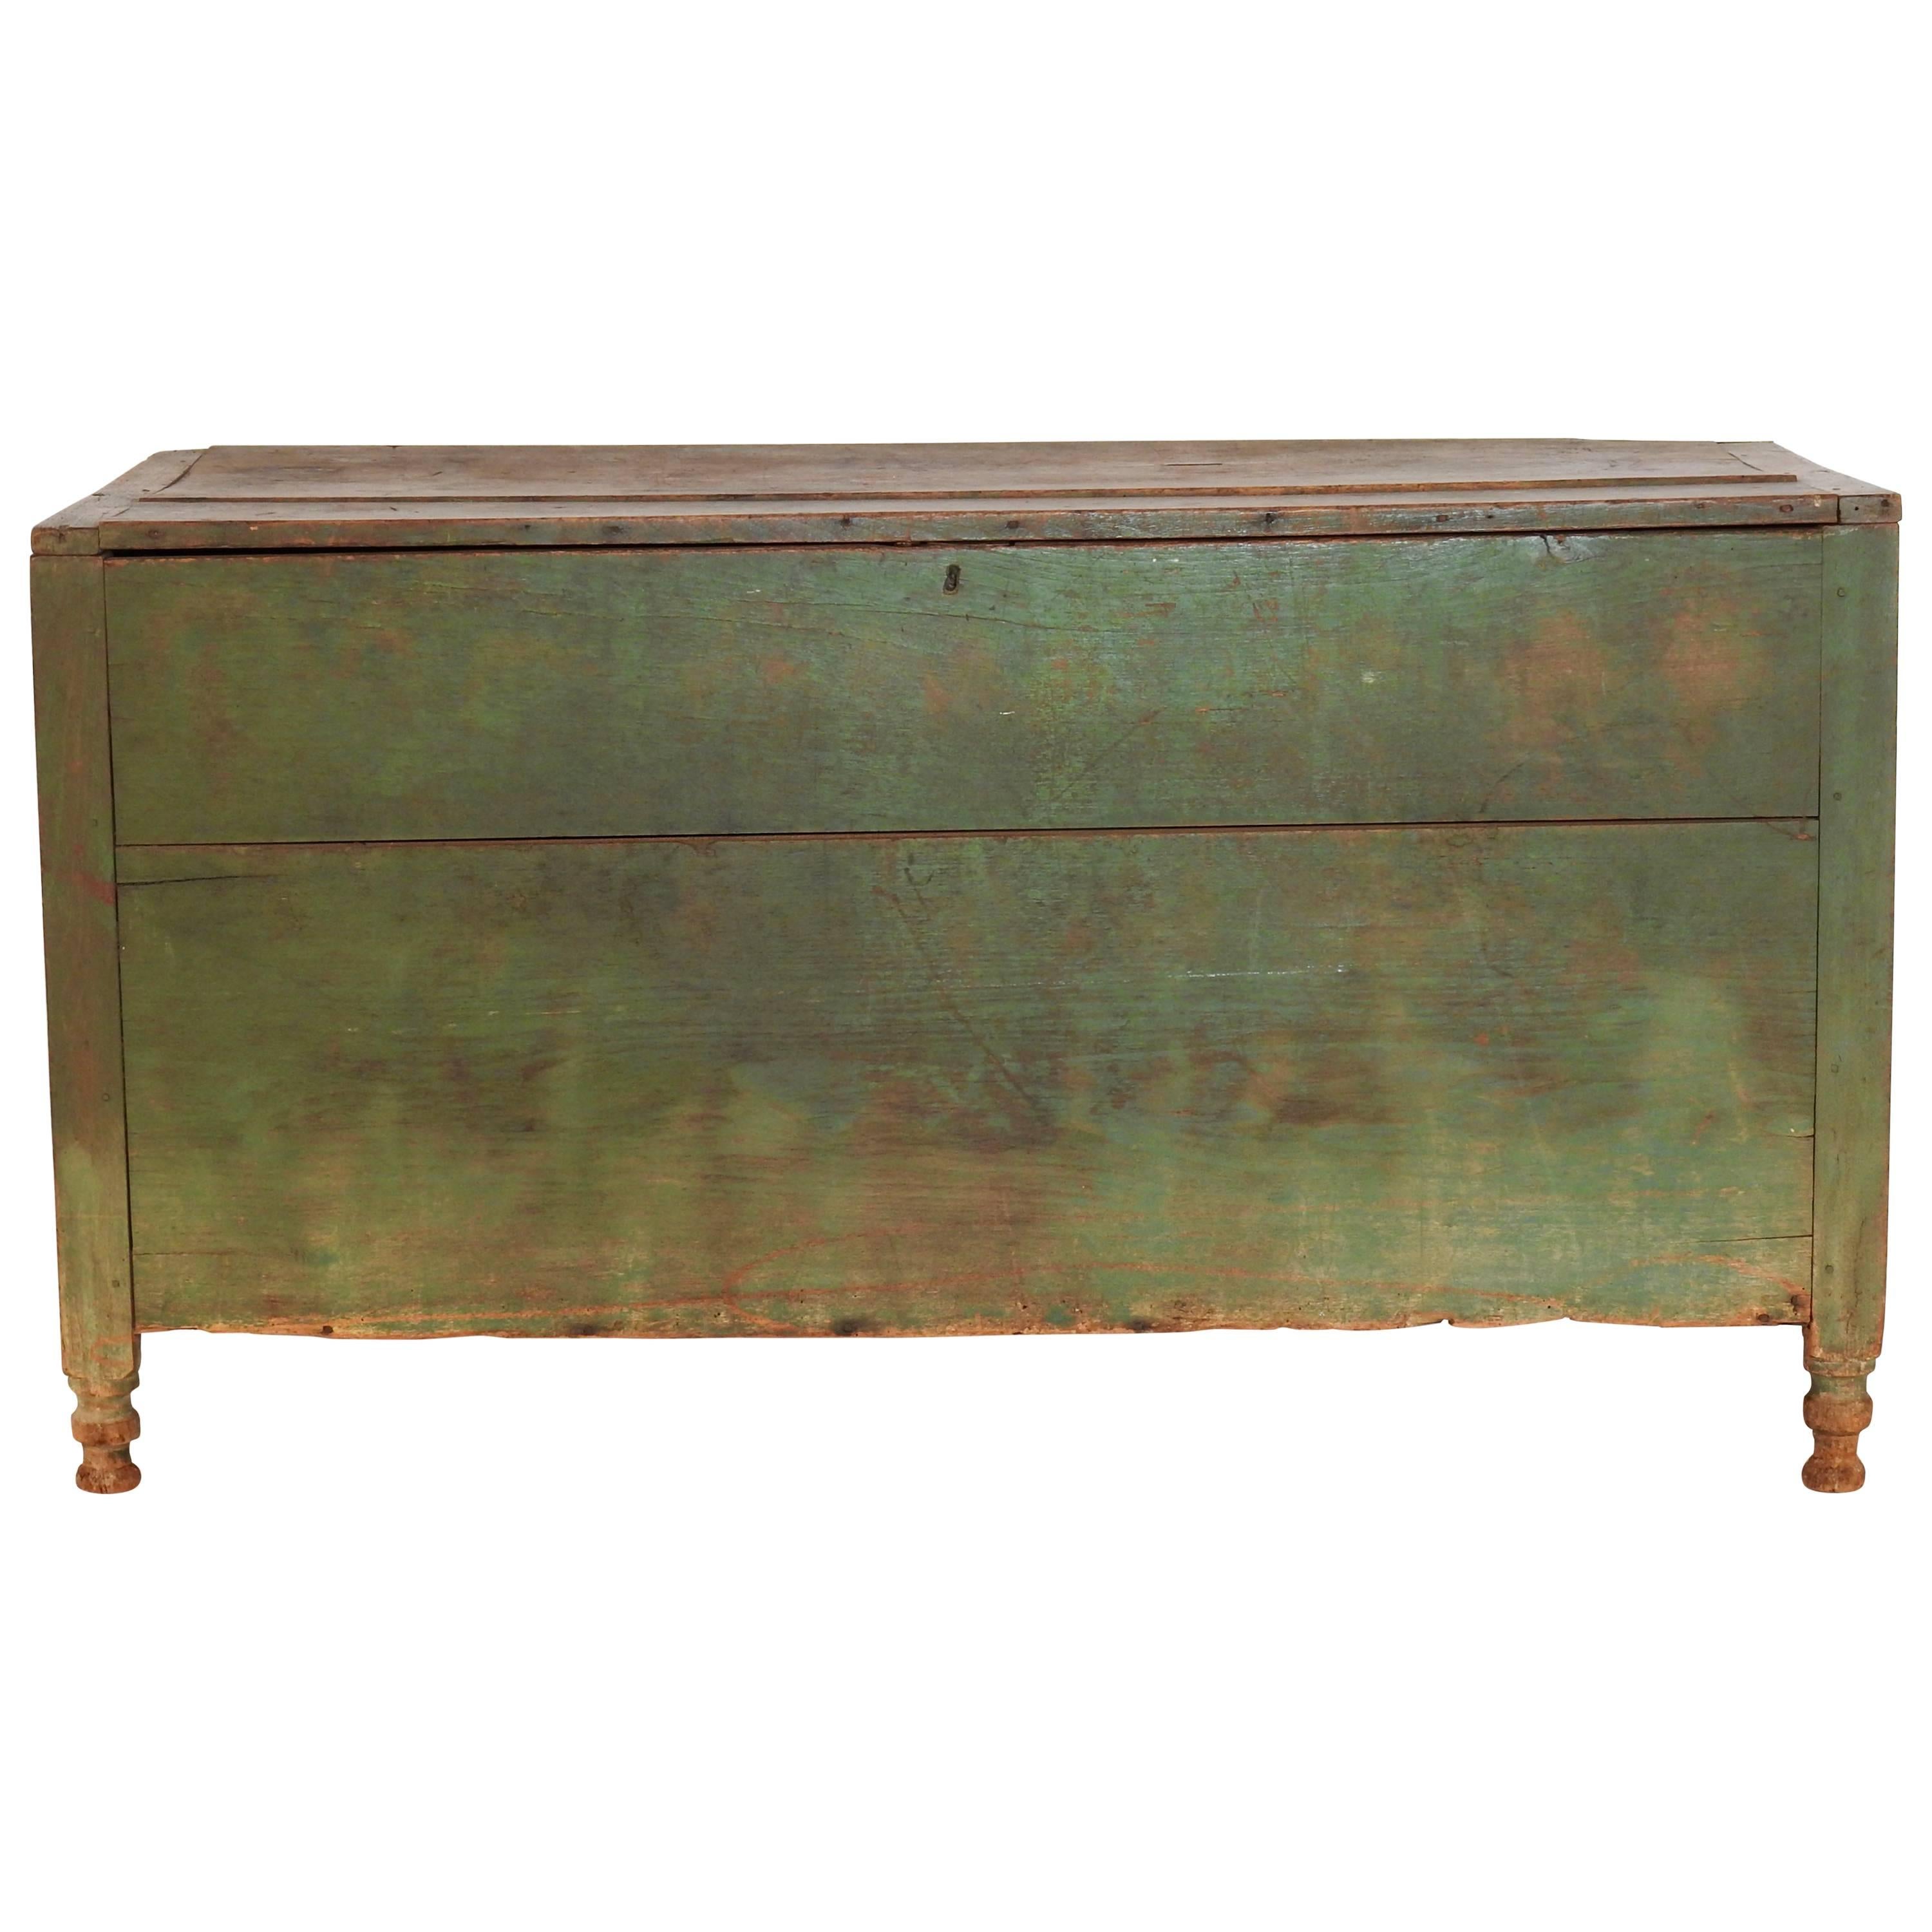 Blanket/Mule Chest with Aged Green Painted Patina Pre Civil War